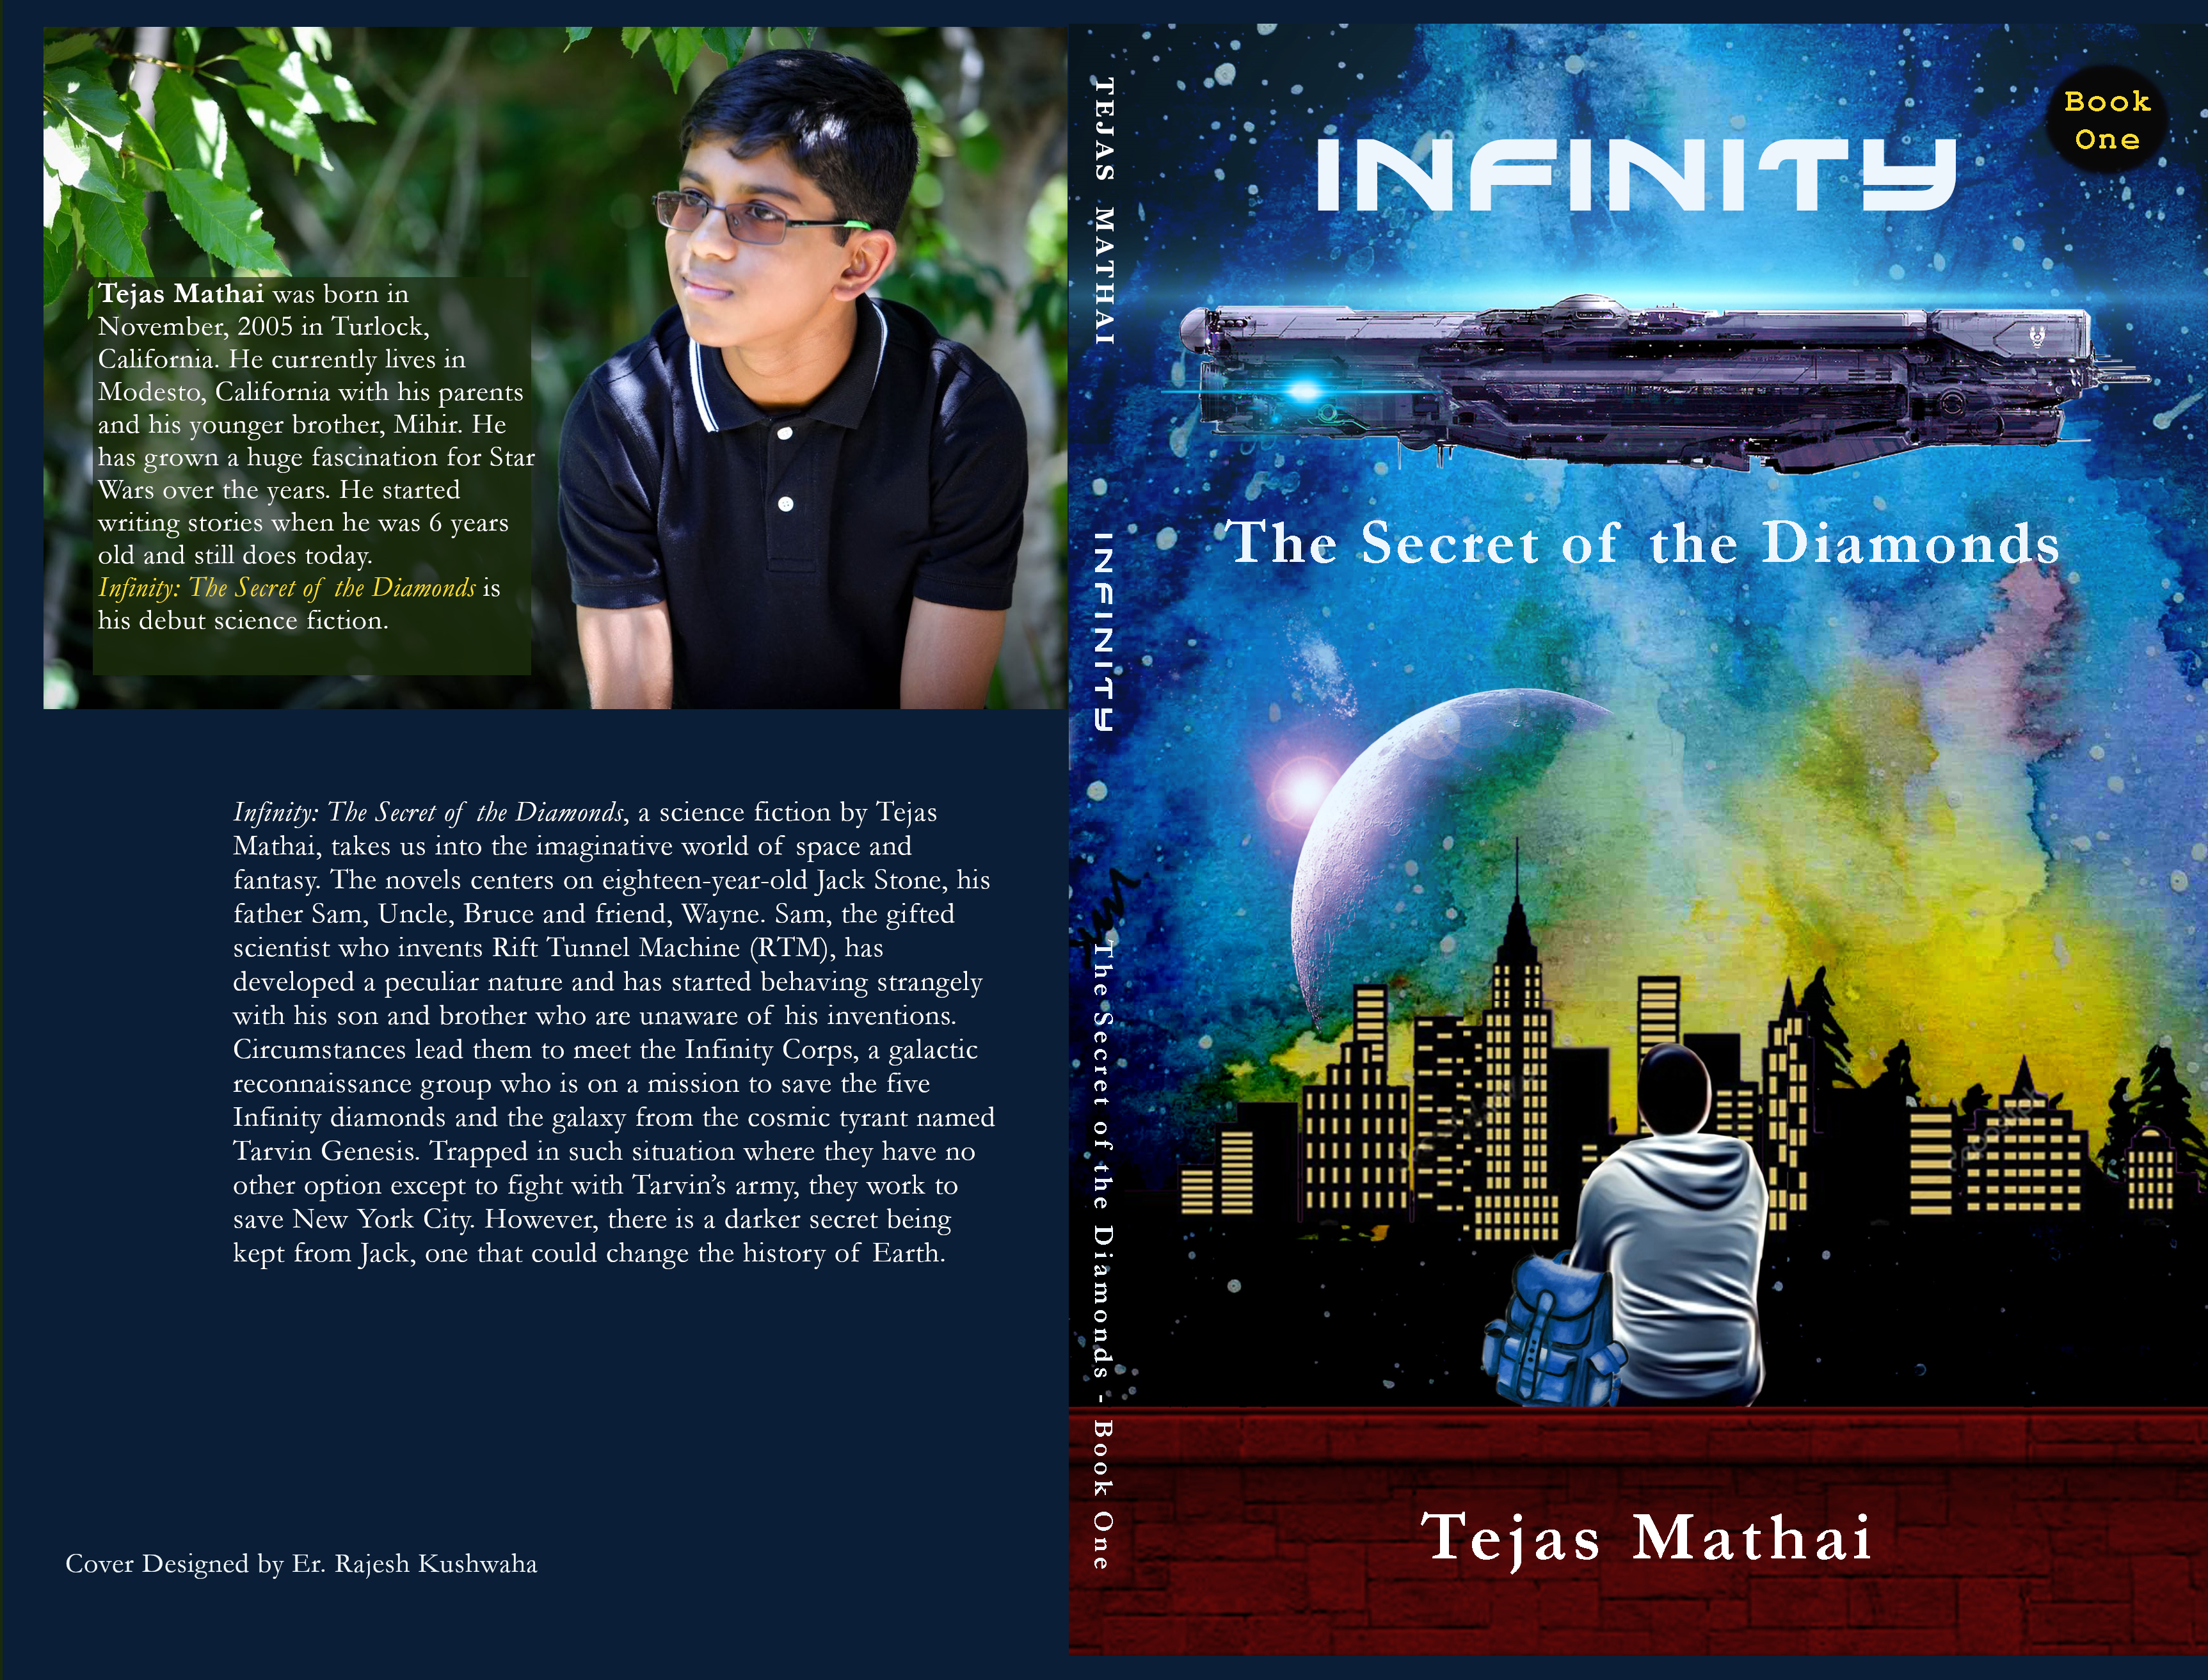 Book cover for Infinity, The Secret of the Diamonds, in which a spaceship is flying above a night city view with a moon and sun in the distance and a male with his back to us looking at the scene